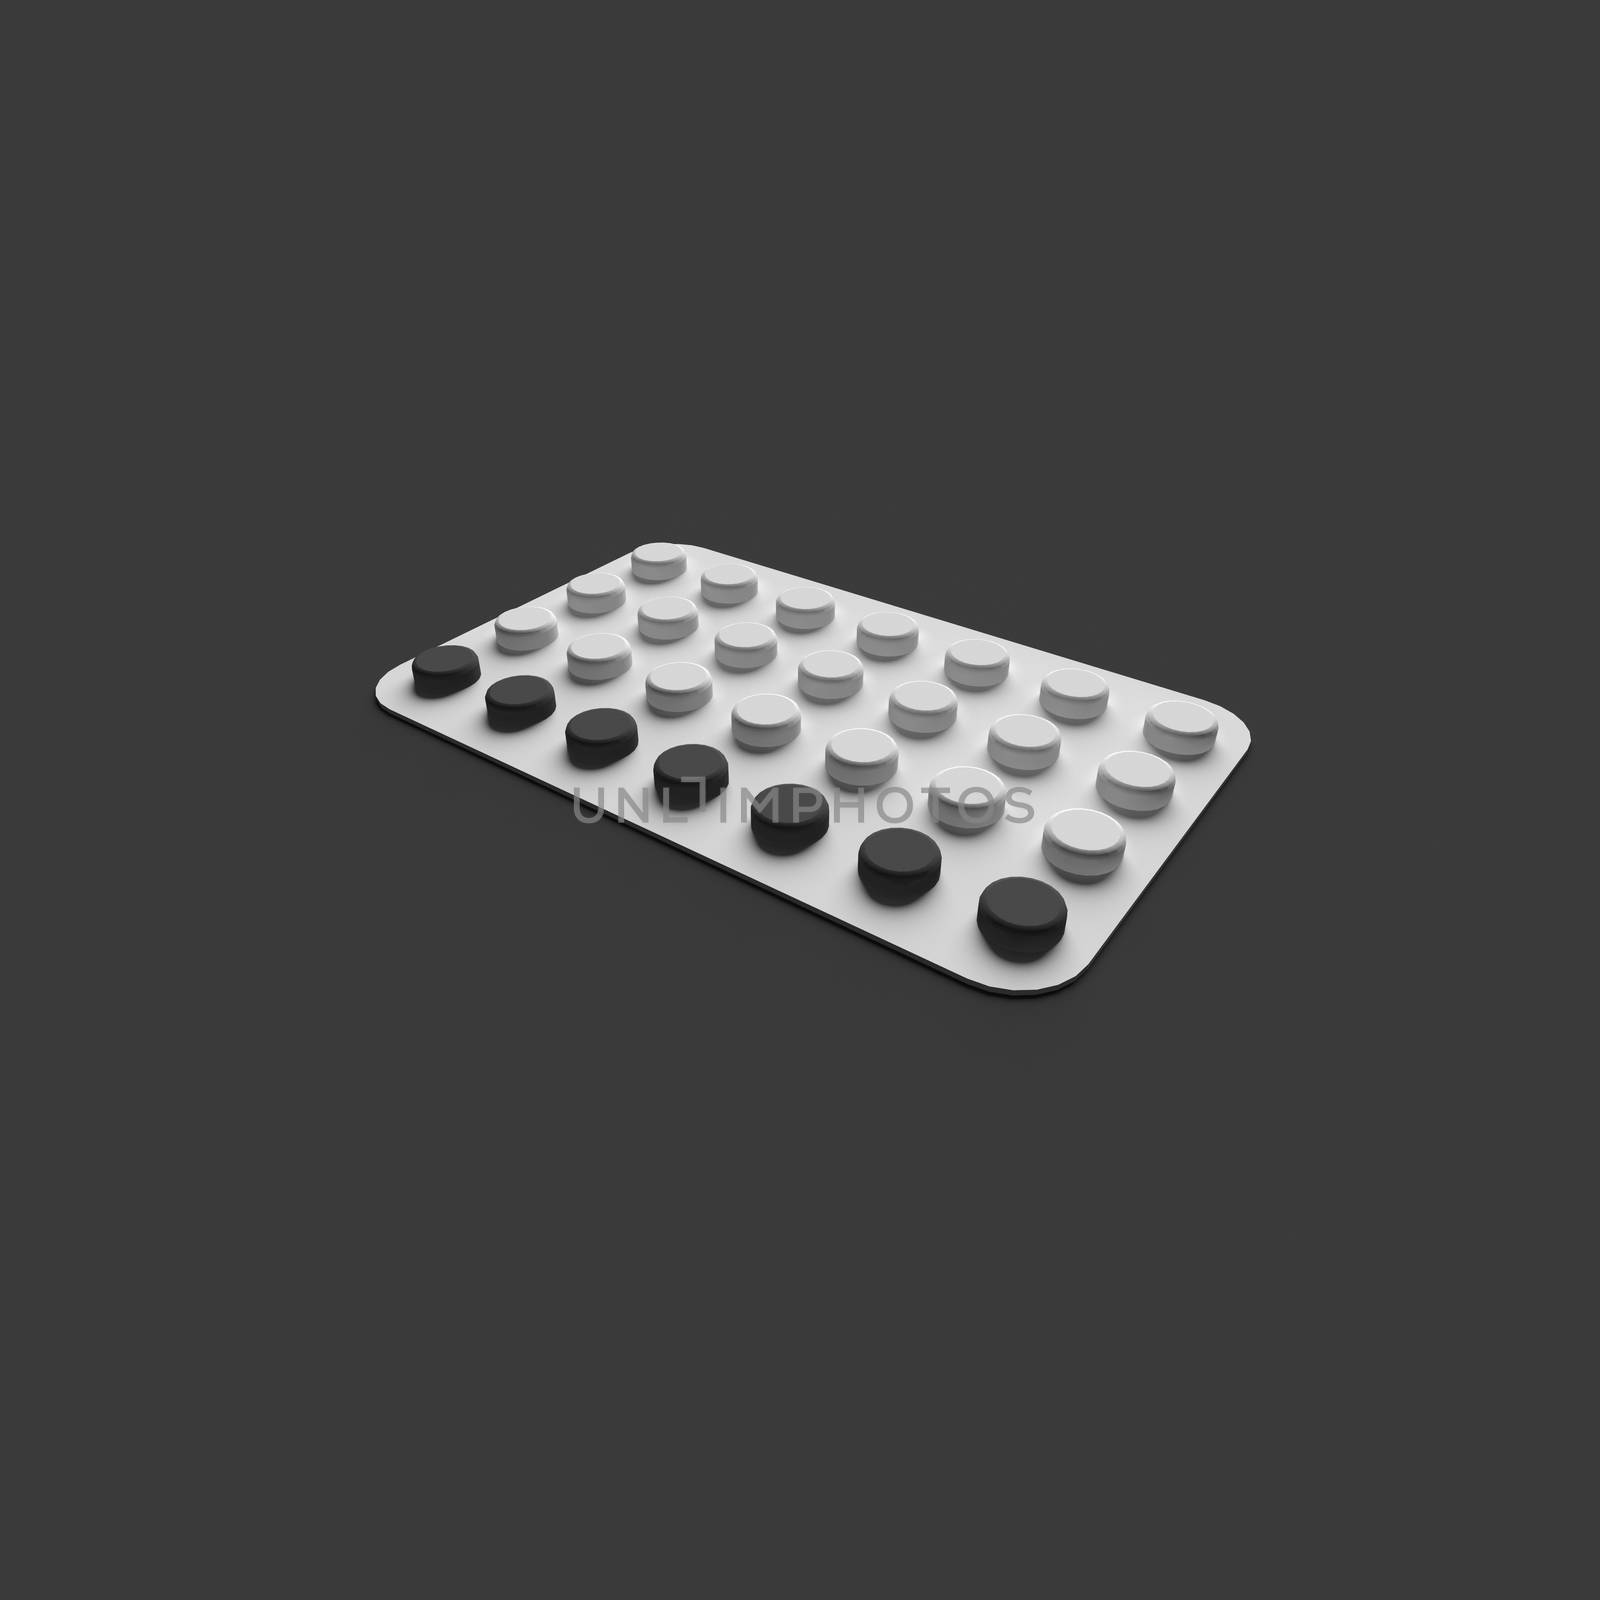 3D RENDERING OF DISK-SHAPED TABLETS by PrettyTG